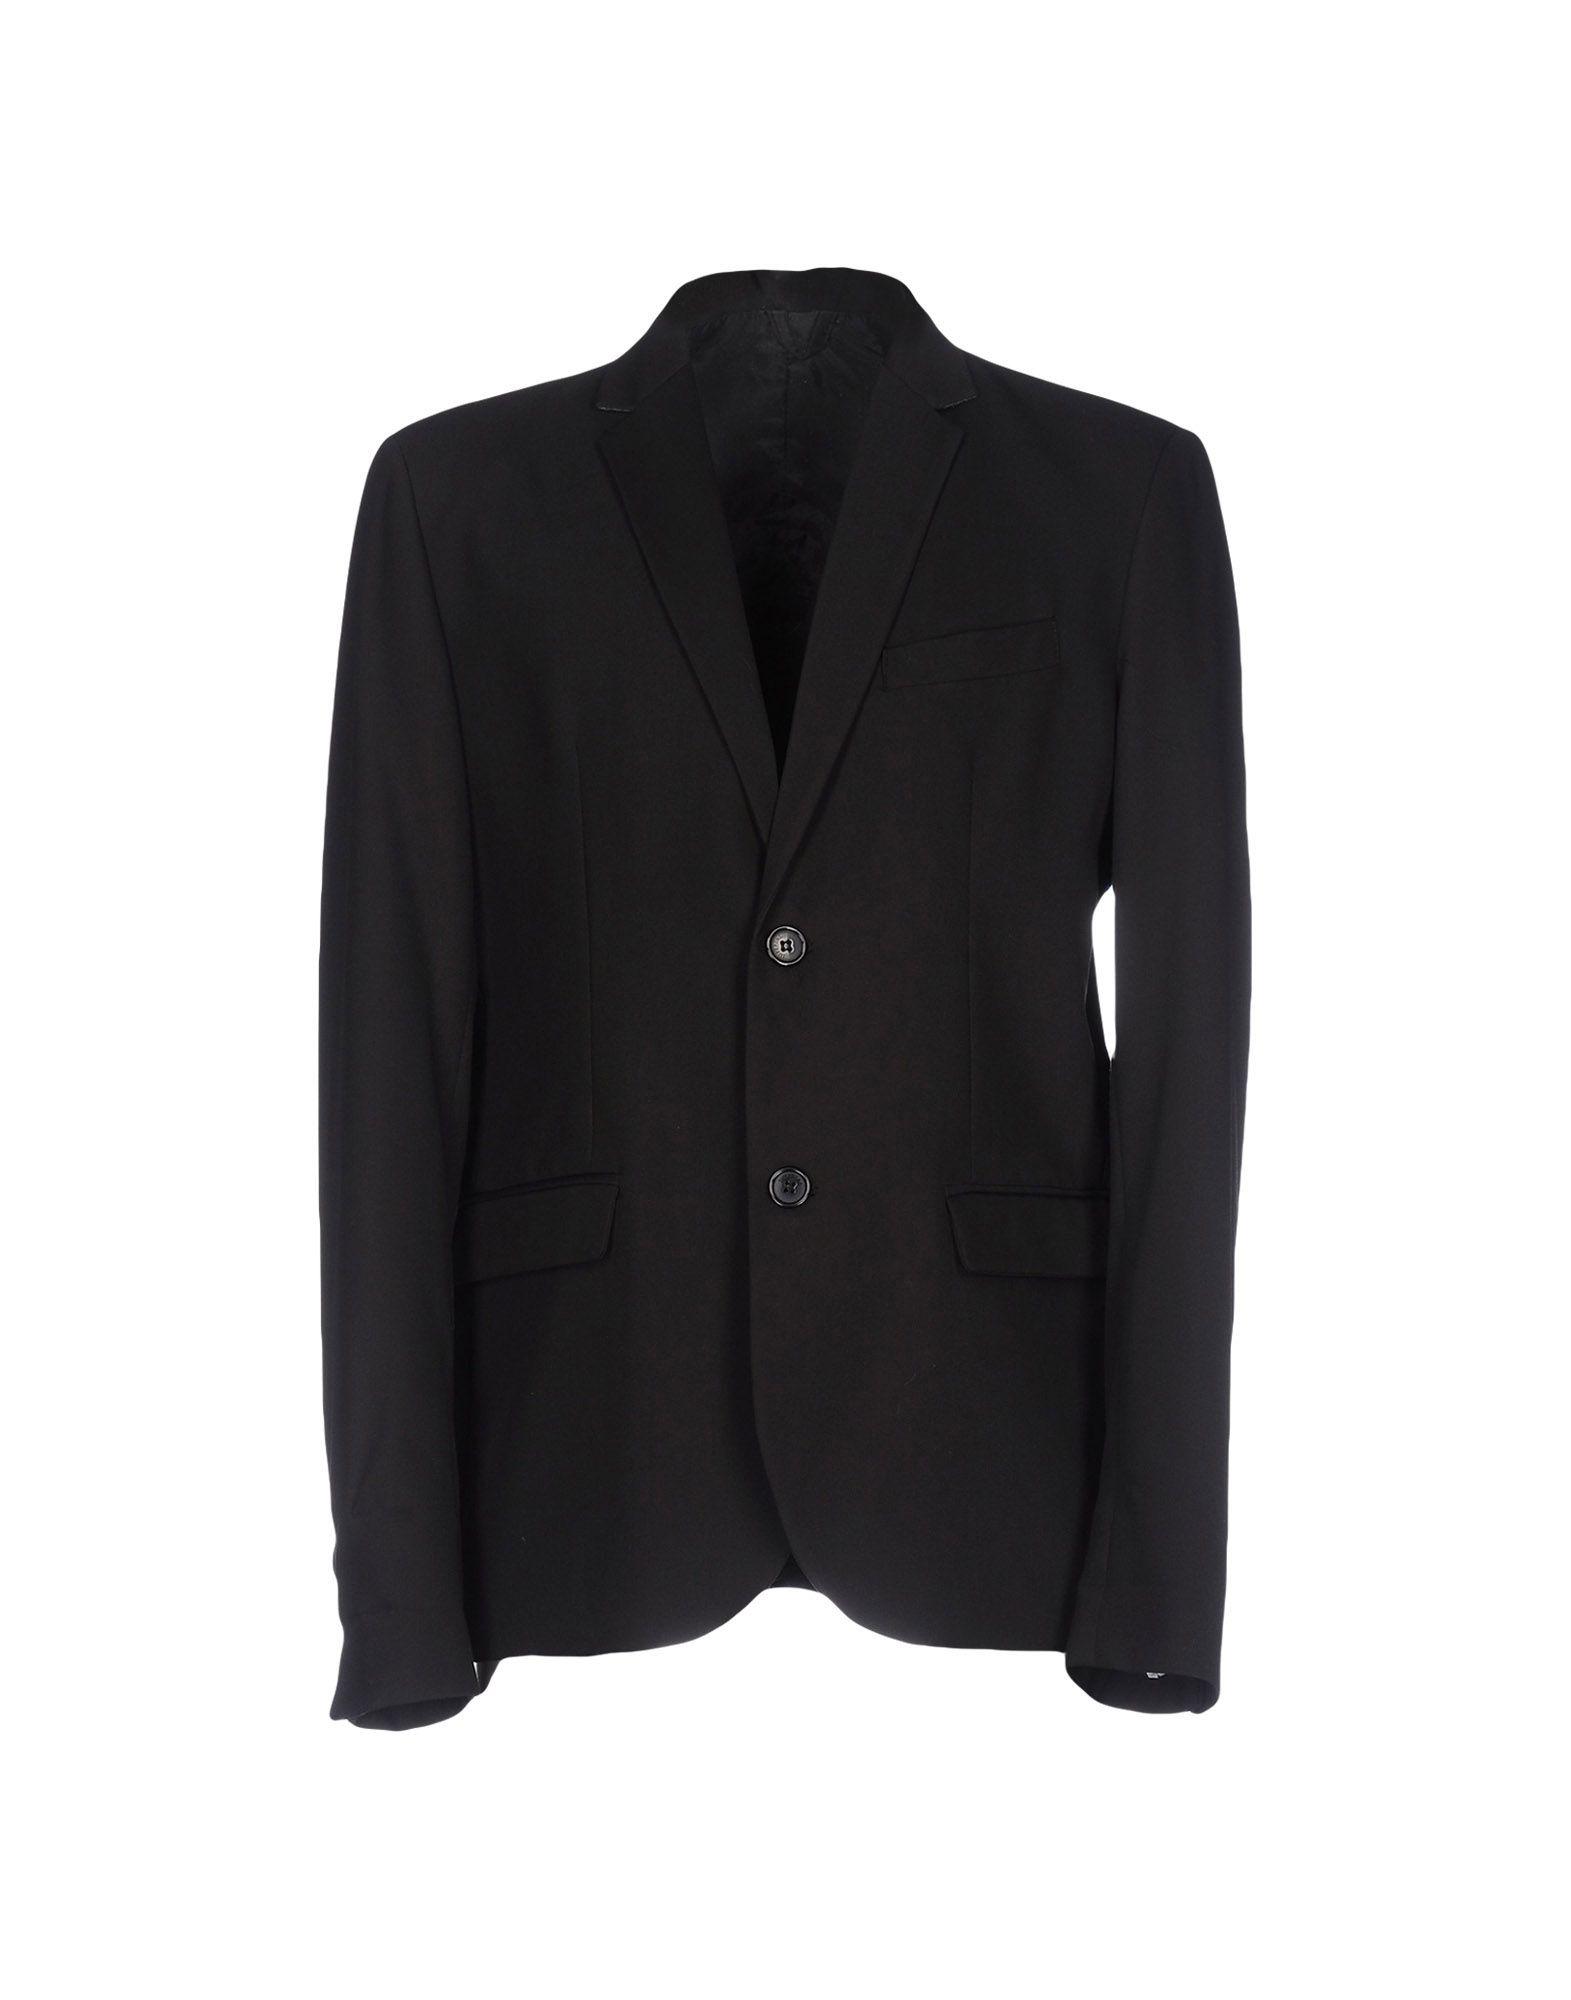 Imperial Synthetic Suit Jacket in Black for Men - Lyst